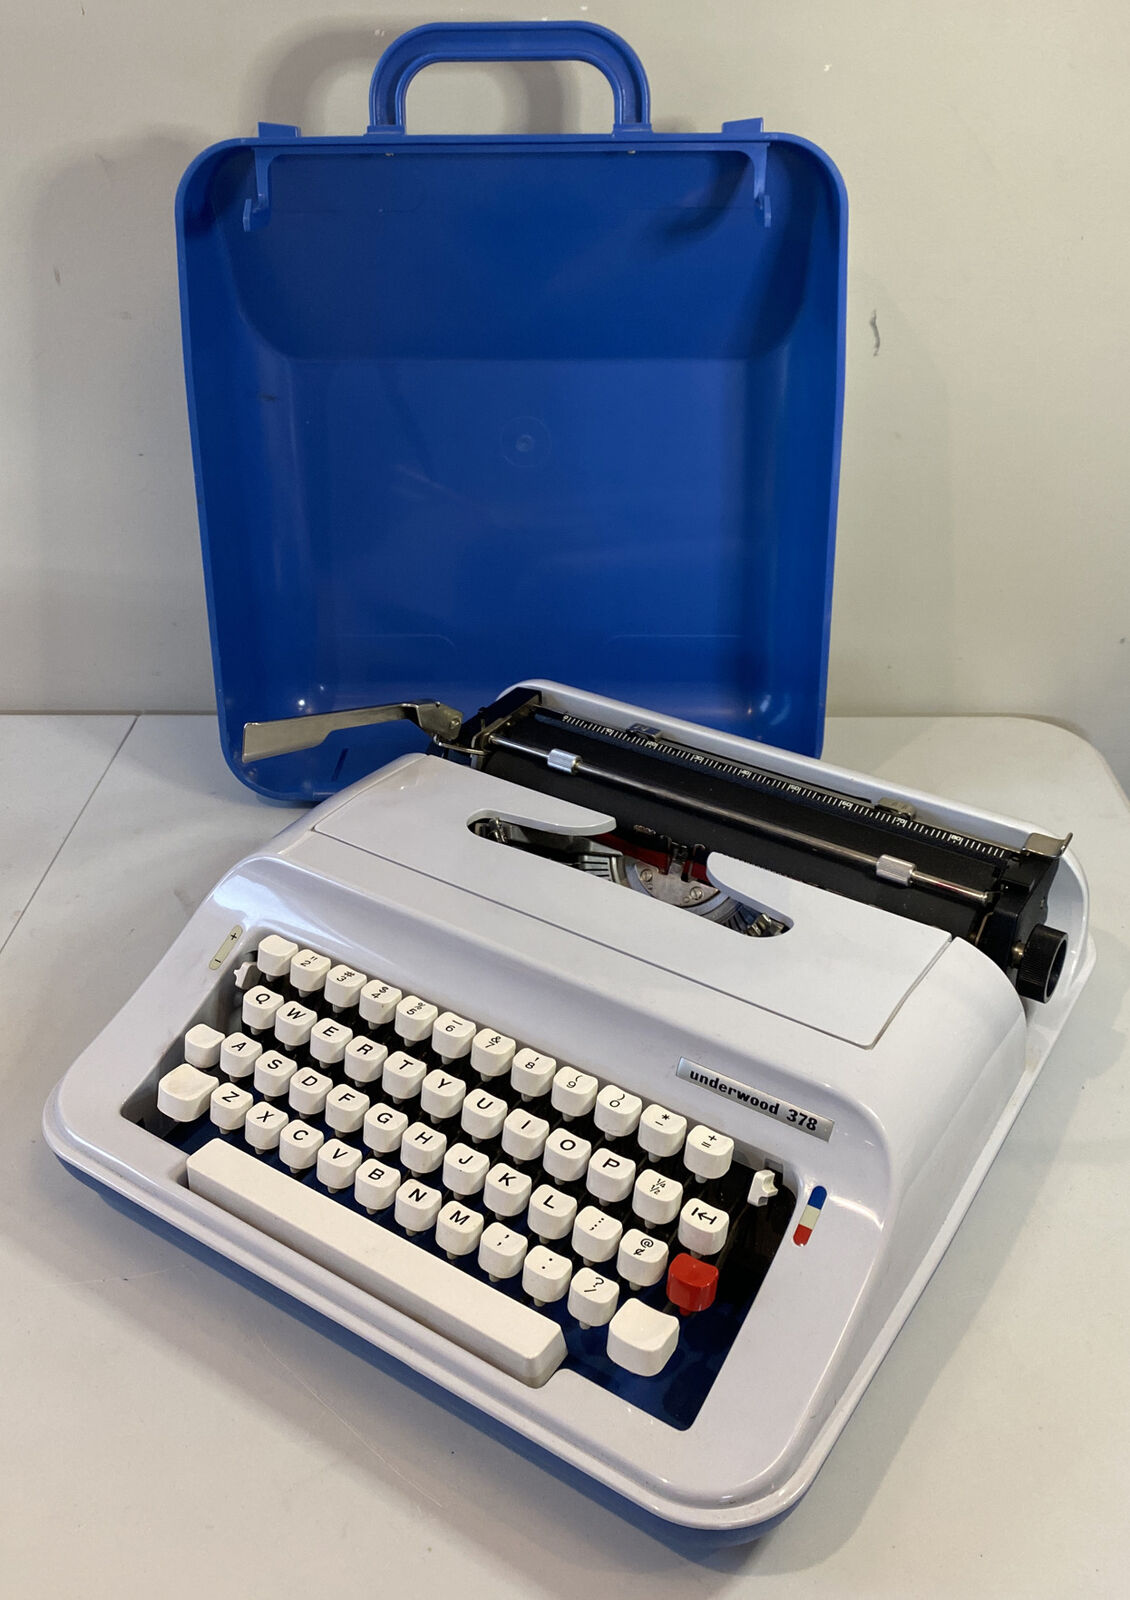 Vintage UNDERWOOD 378 Blue & Gray Portable Typewriter with Ribbon Made in Spain